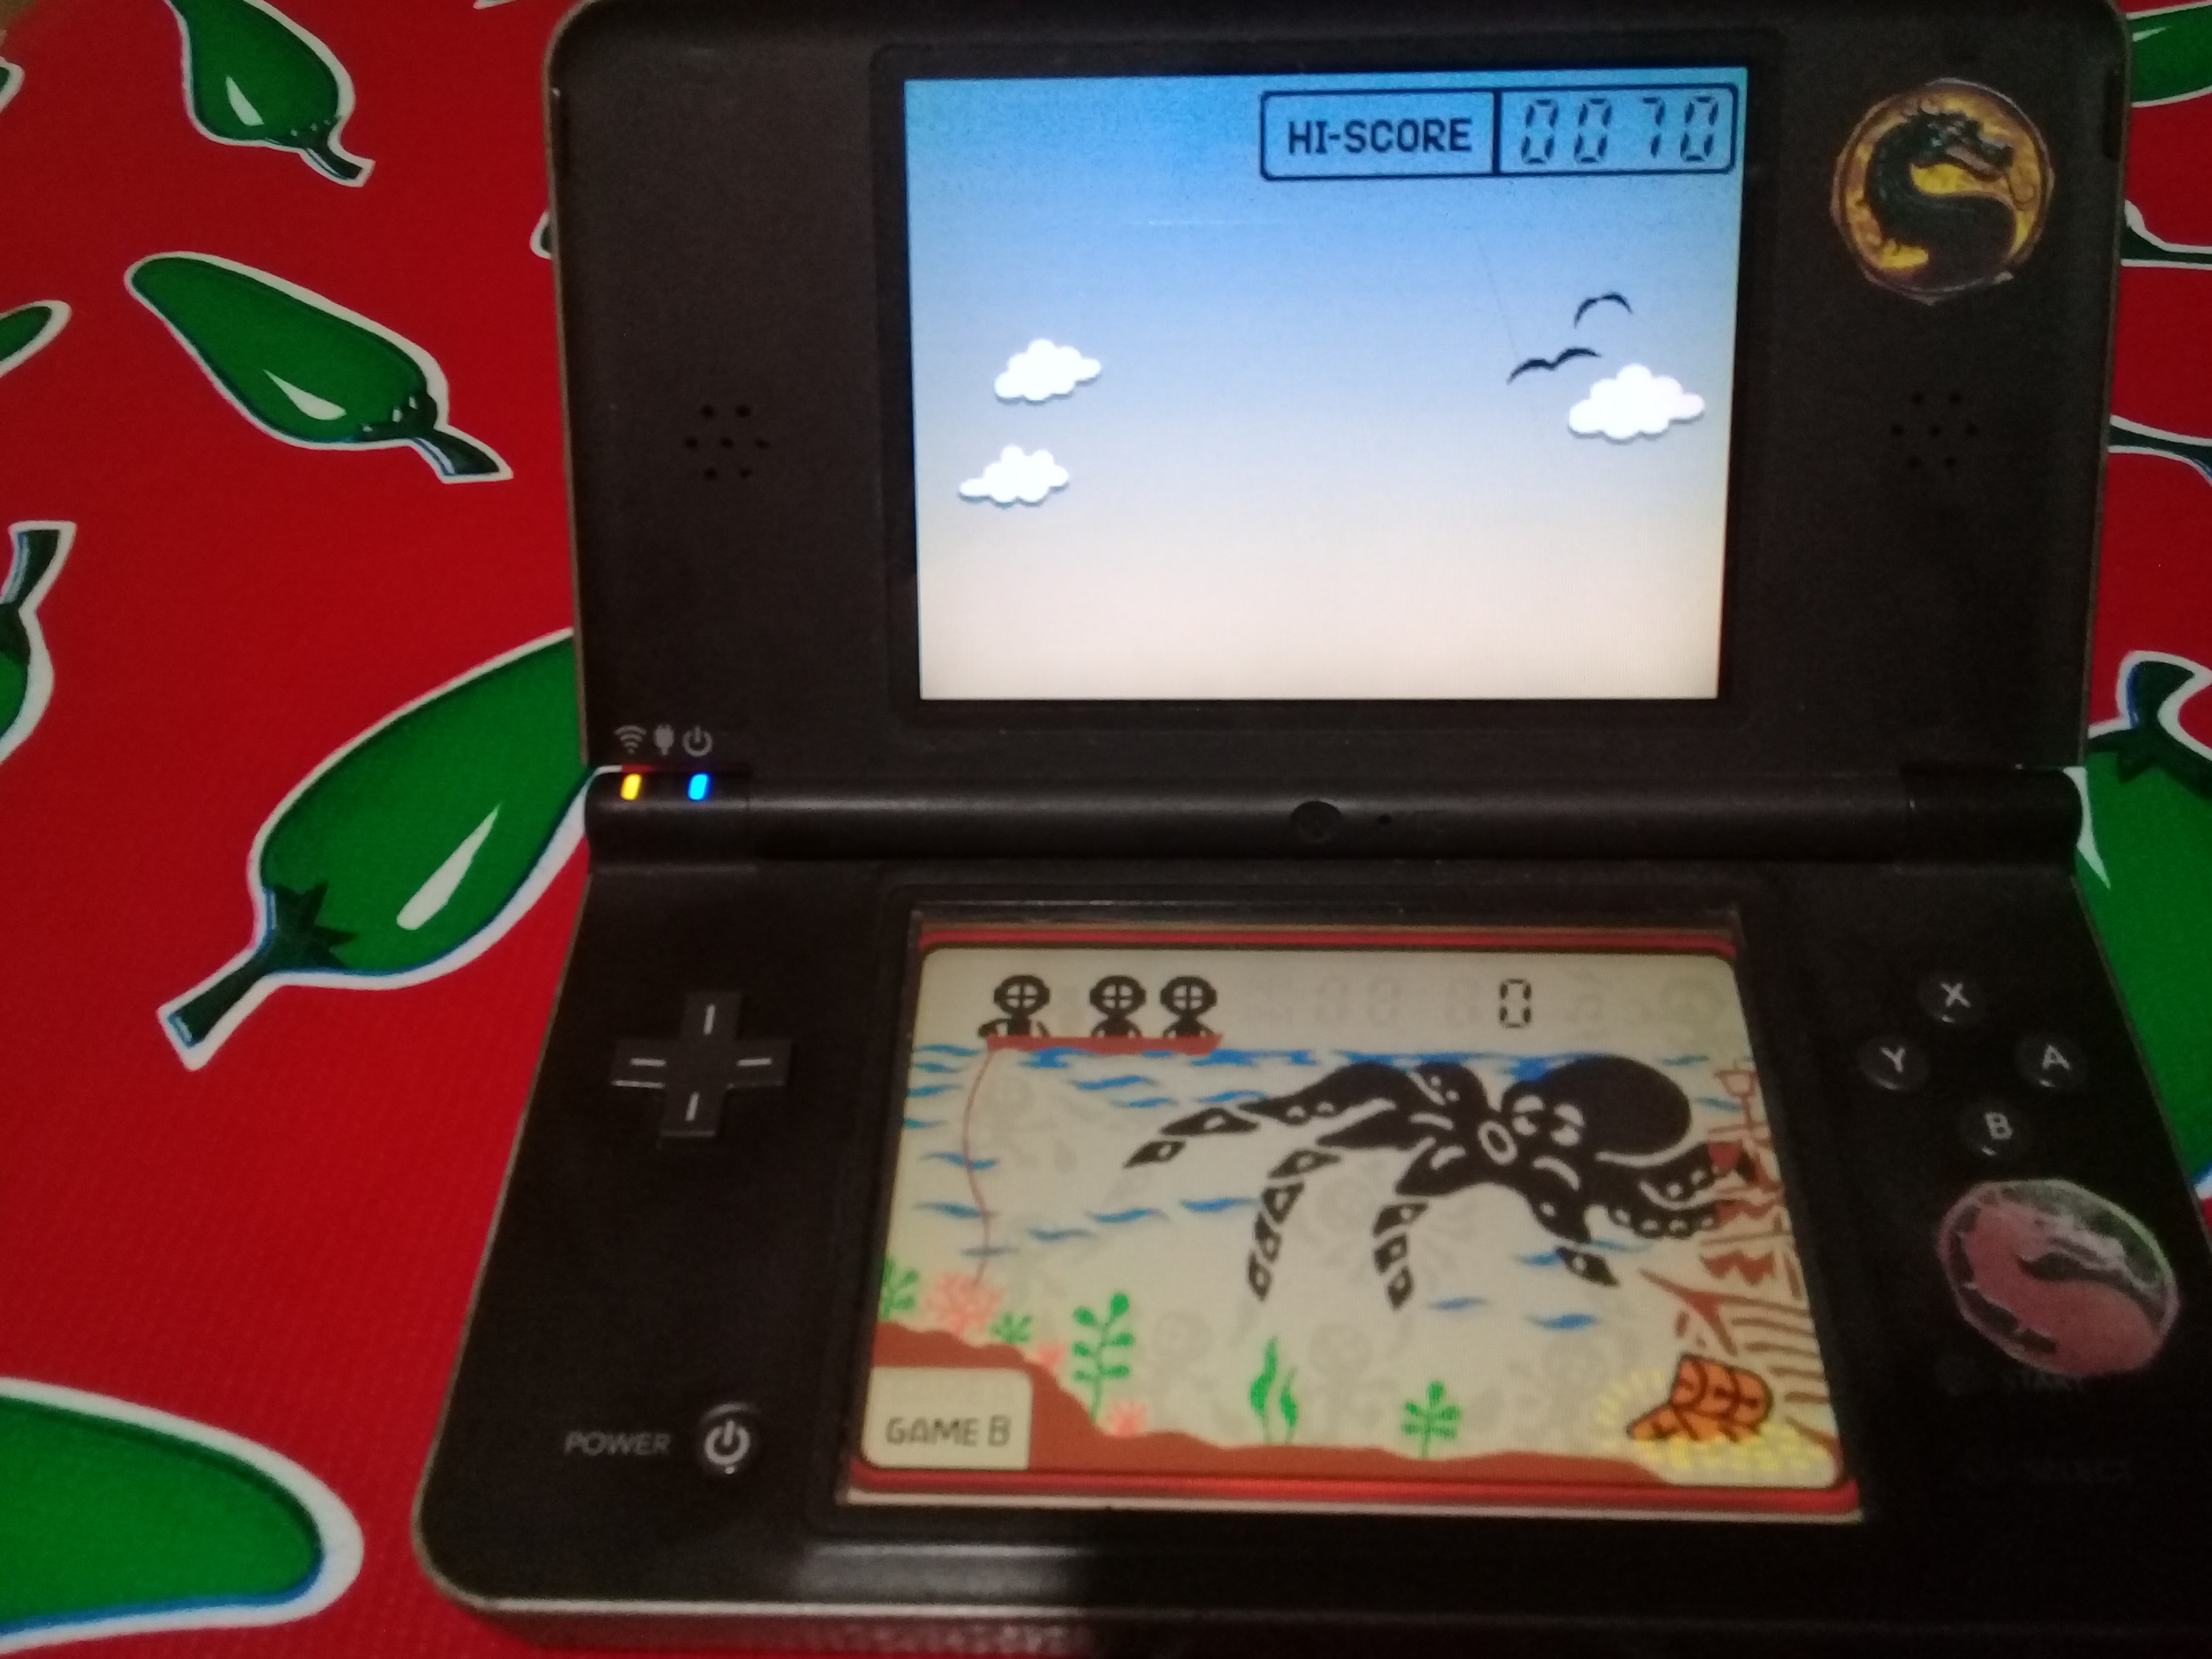 omargeddon: Game & Watch Collection 2: Octopus [Game B] (Nintendo DS) 70 points on 2021-09-23 20:50:18